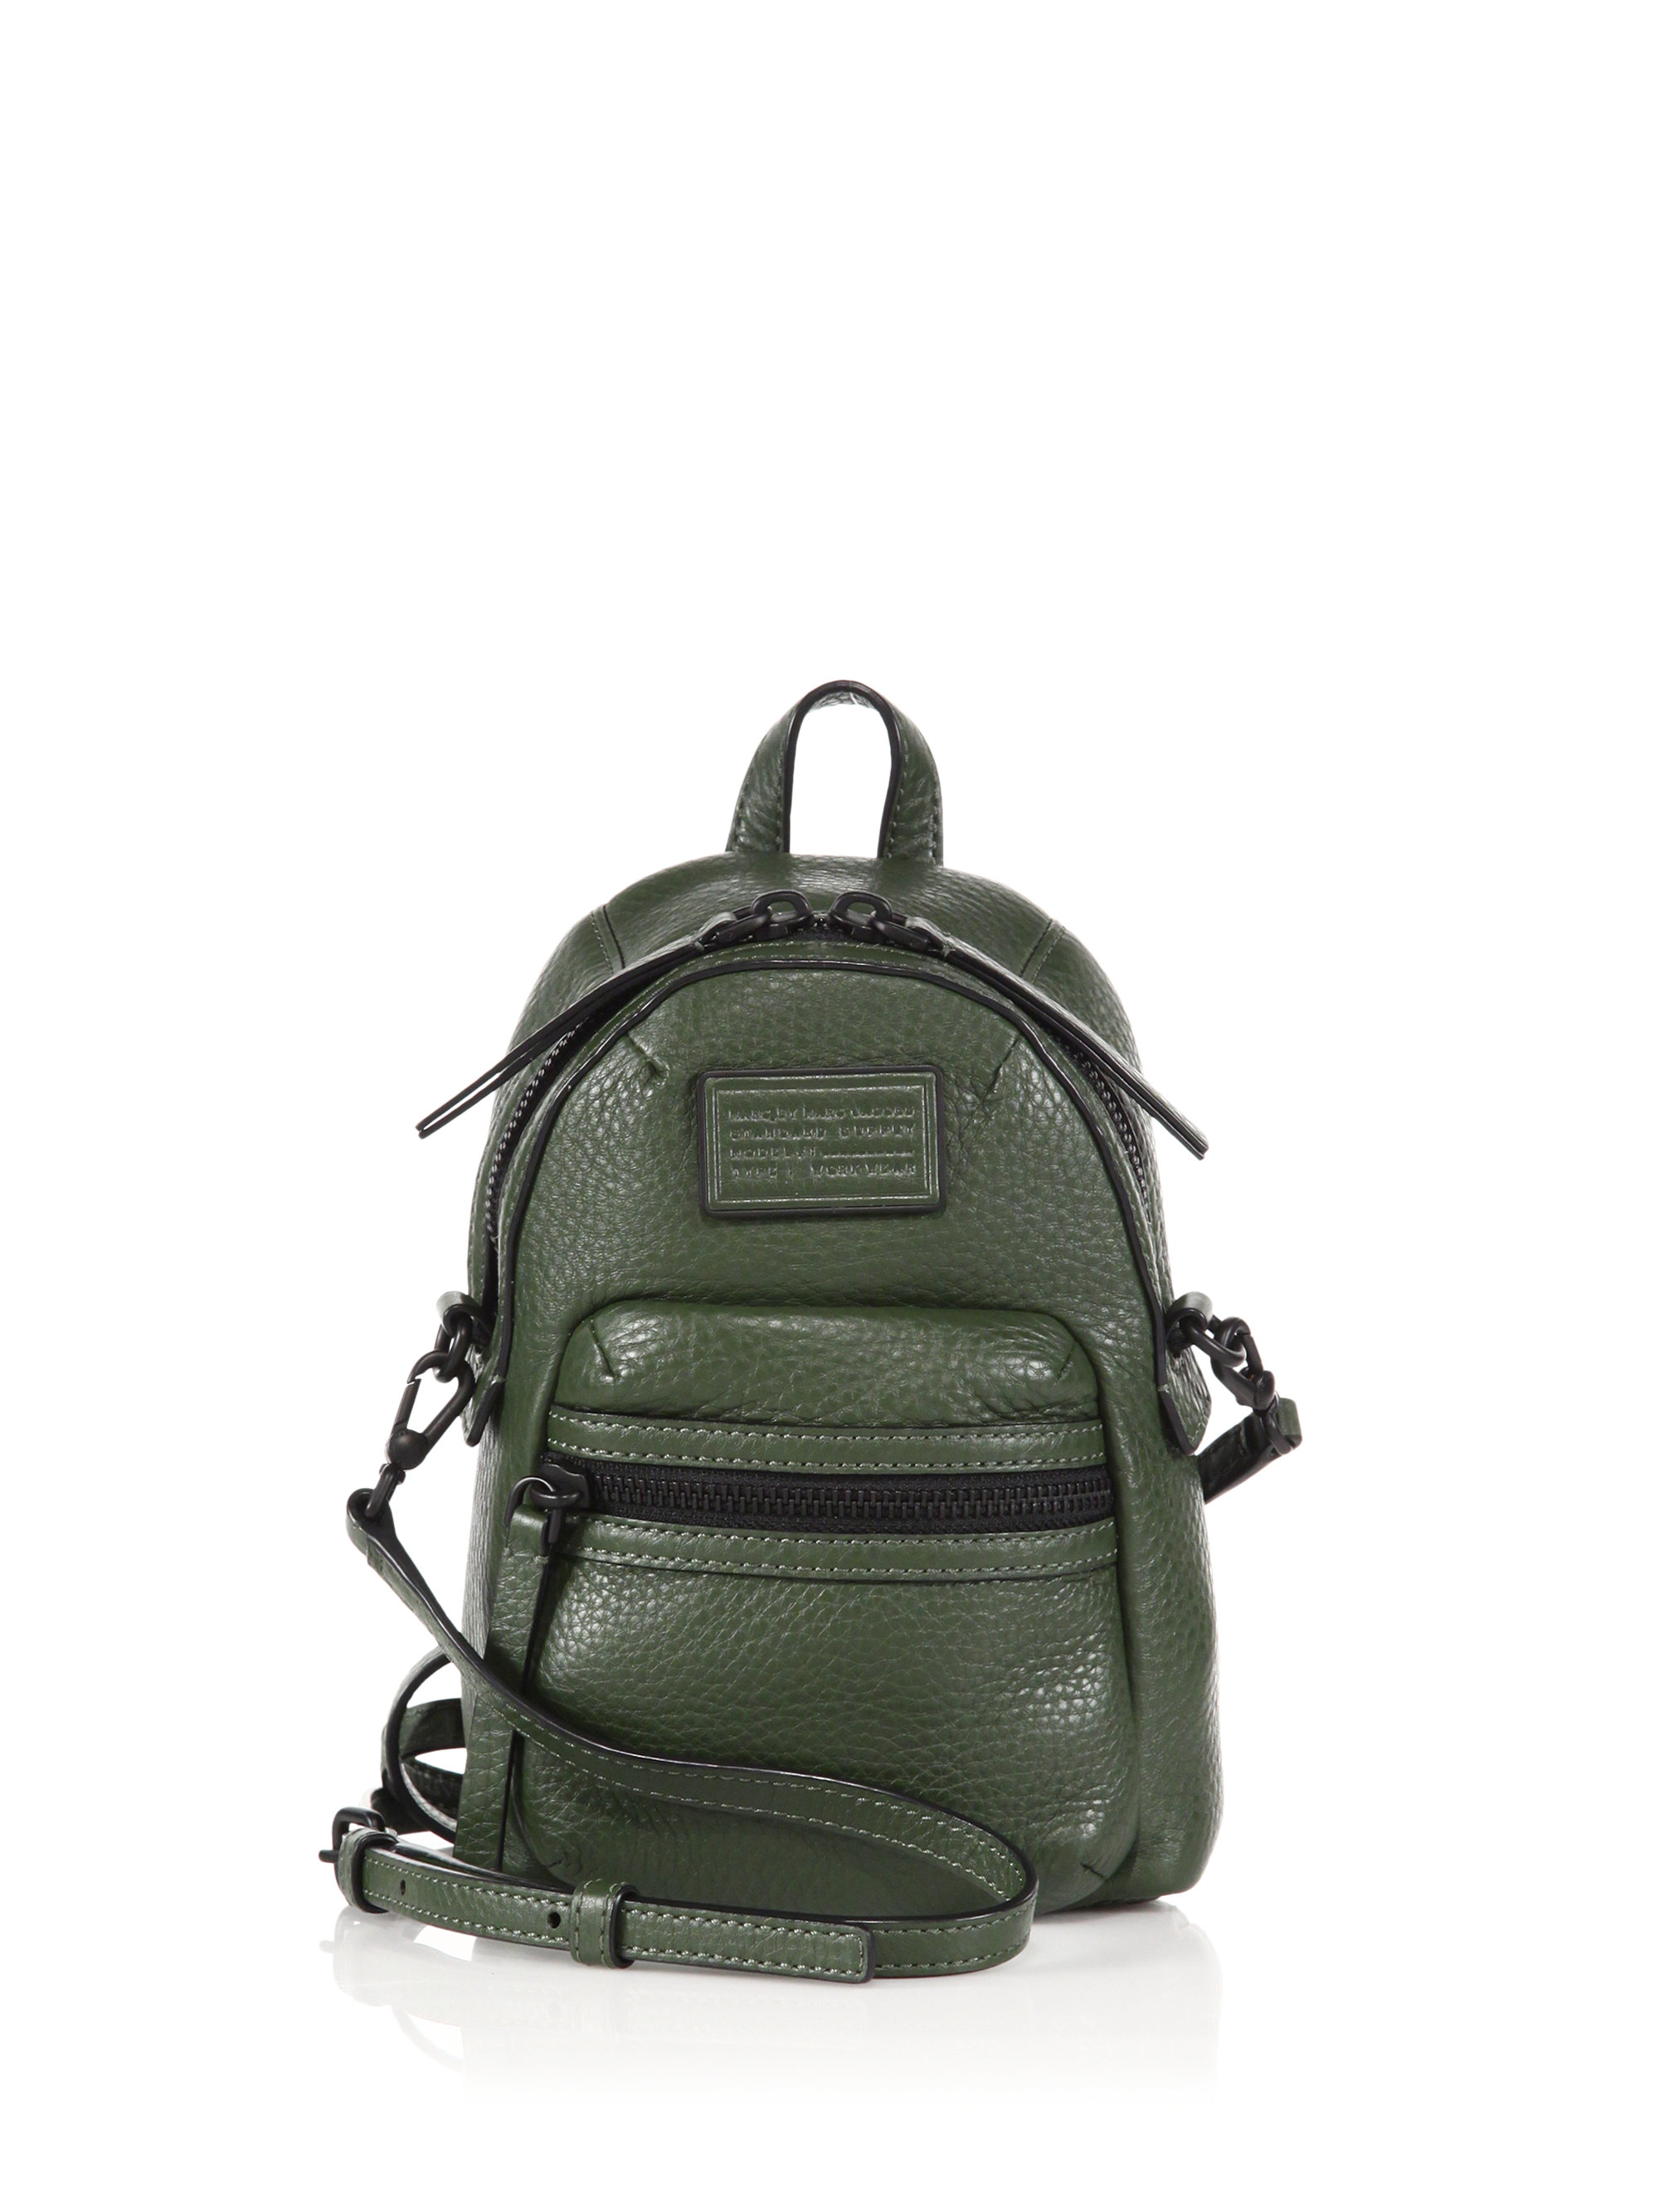 Marc by marc jacobs Domo Biker Mini Leather Backpack in Green | Lyst